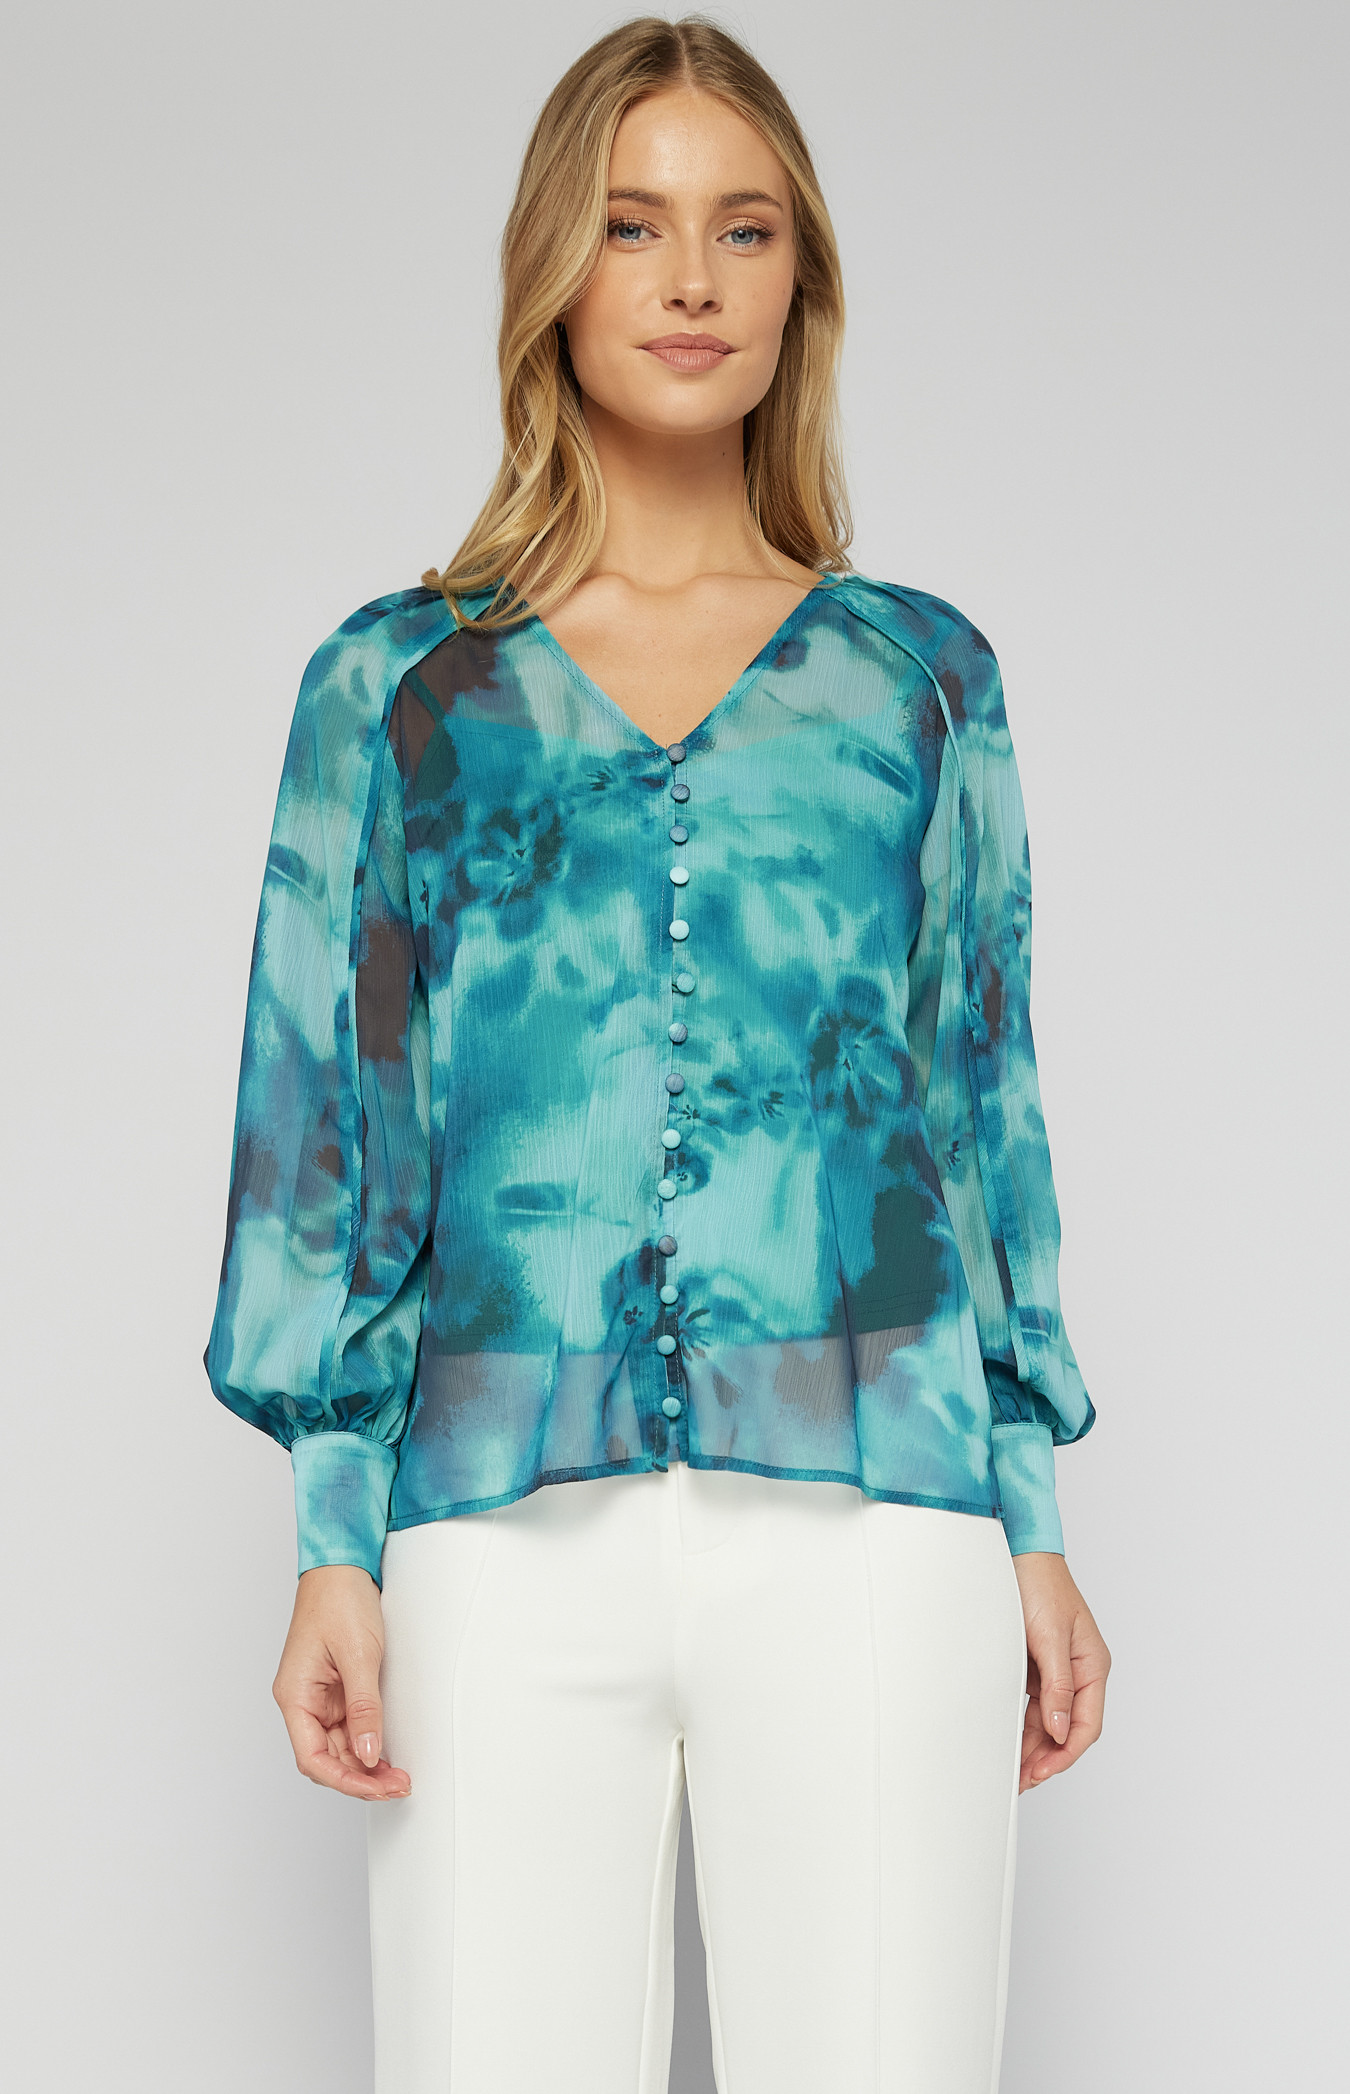 Blurred Floral Print Blouse with Slip Lining (STO718B)